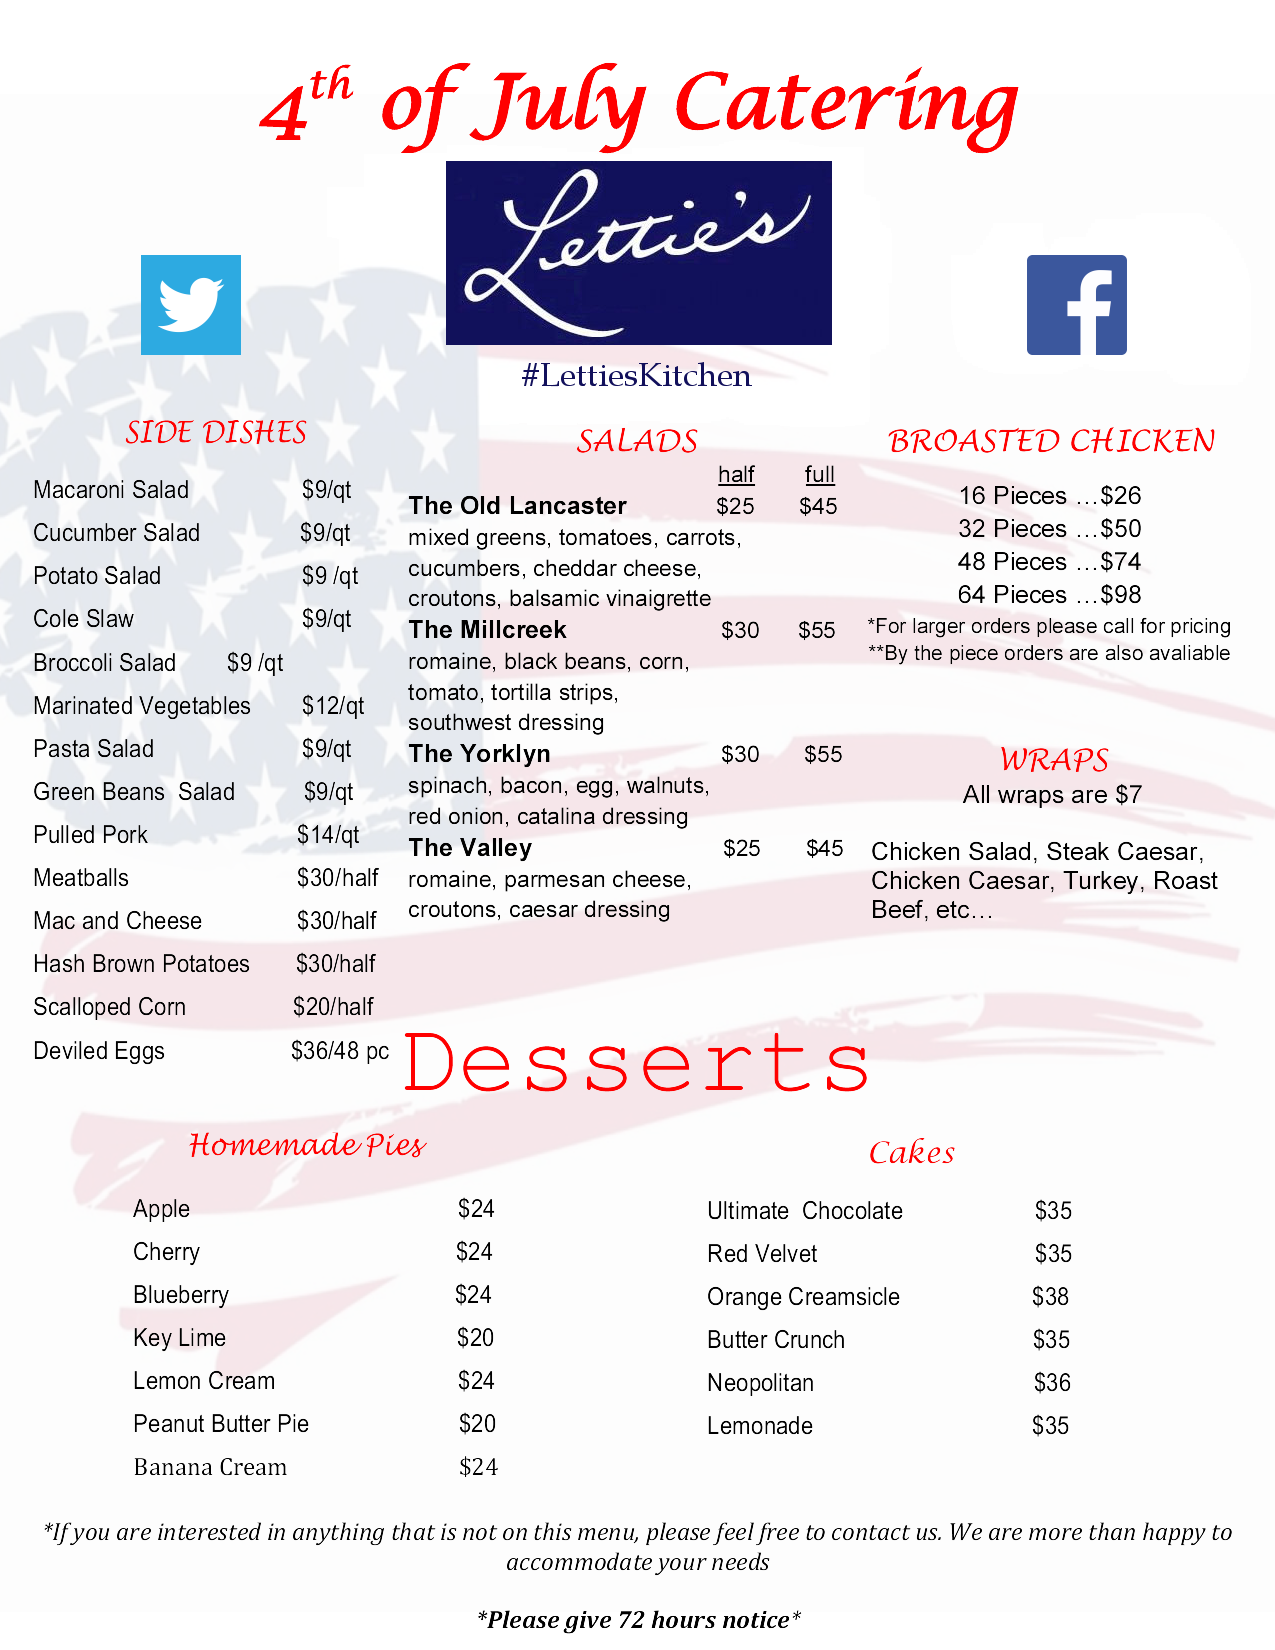 4th Of July Menu 2015 For Lettie s Kitchen